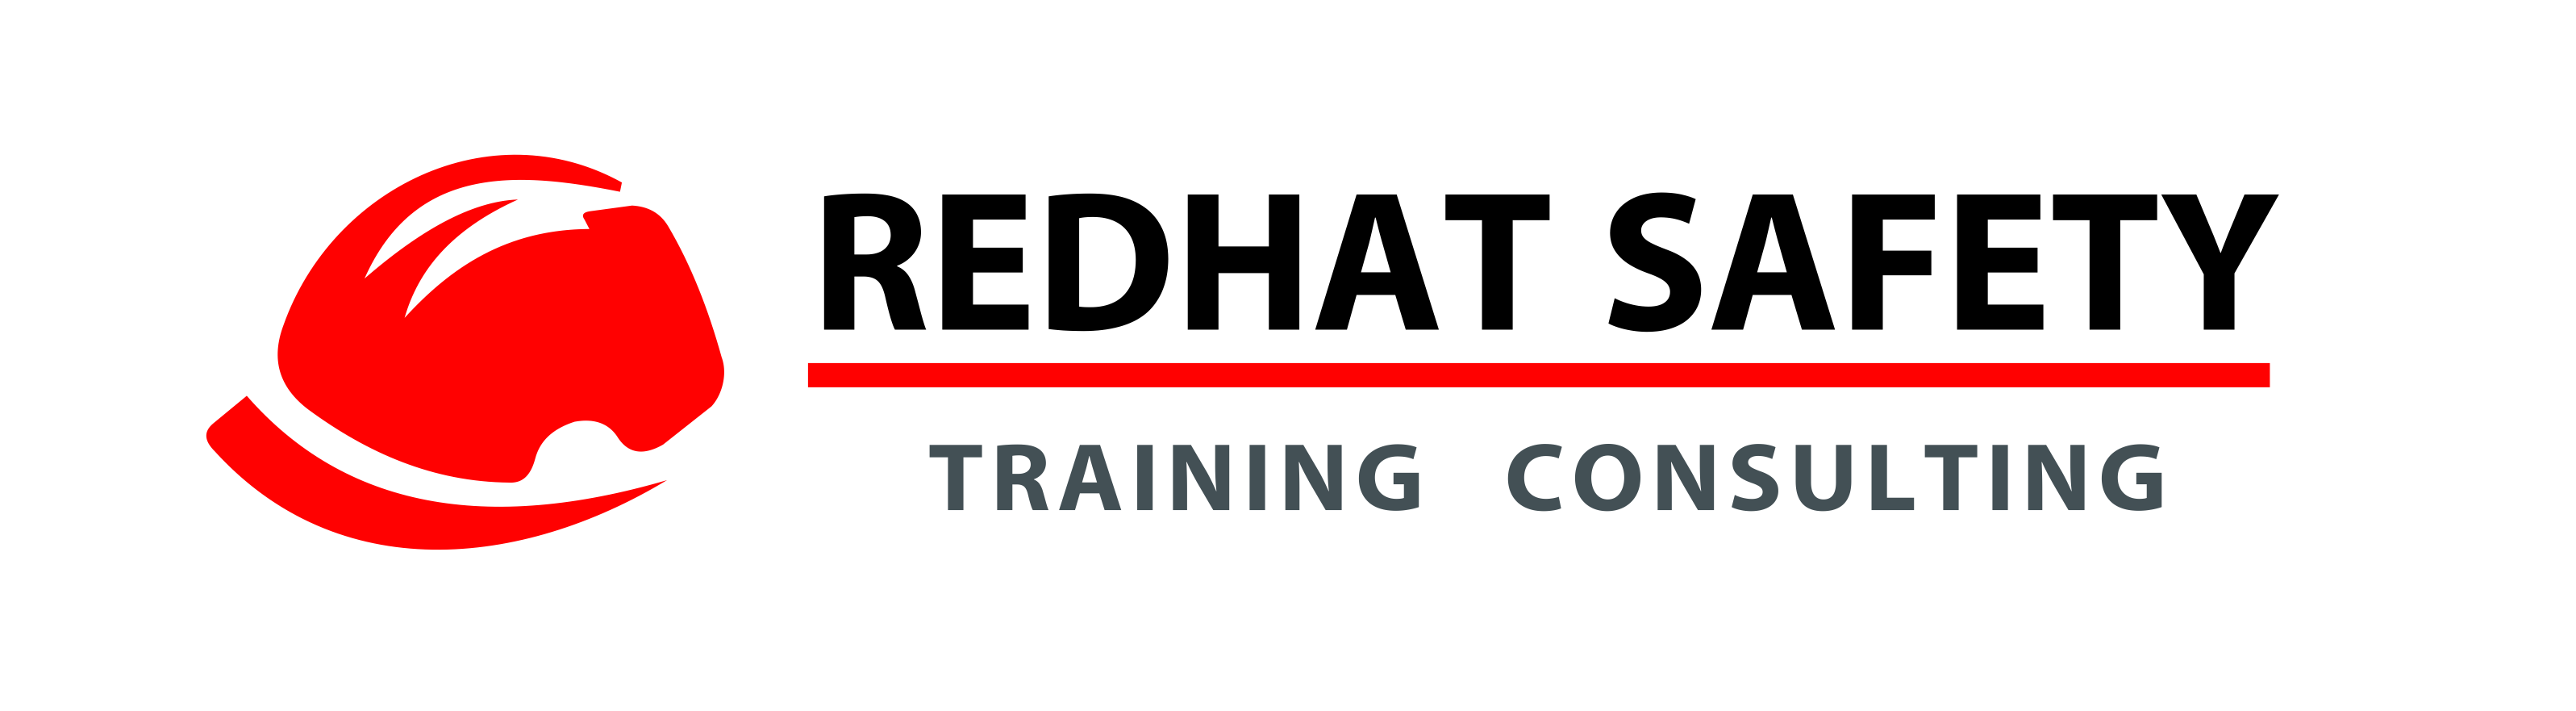 Redhat Safety Training & Consulting Logo